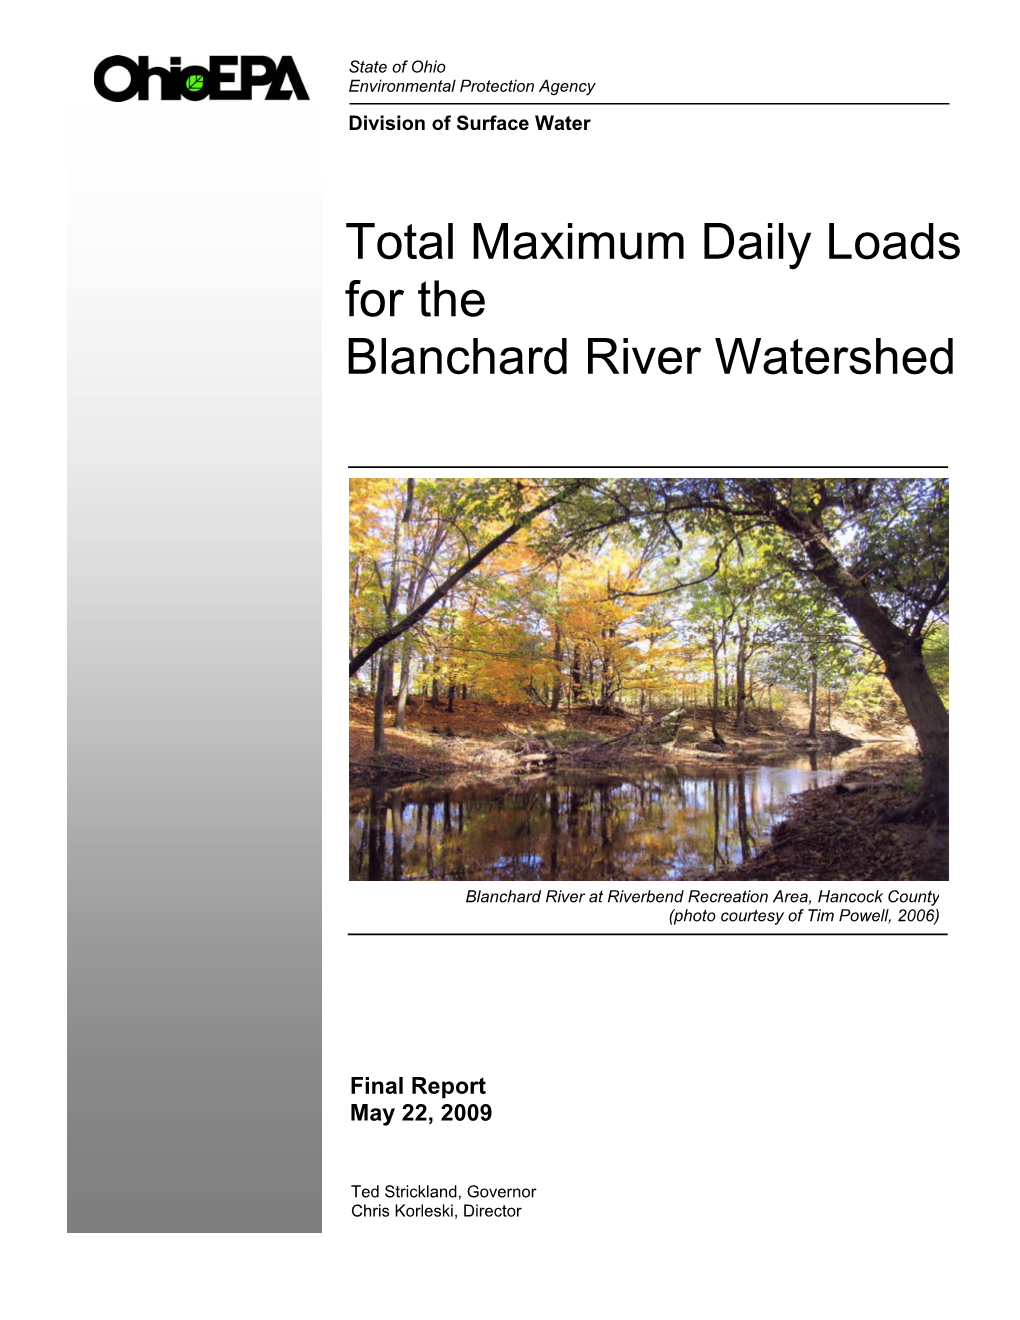 Total Maximum Daily Loads for the Blanchard River